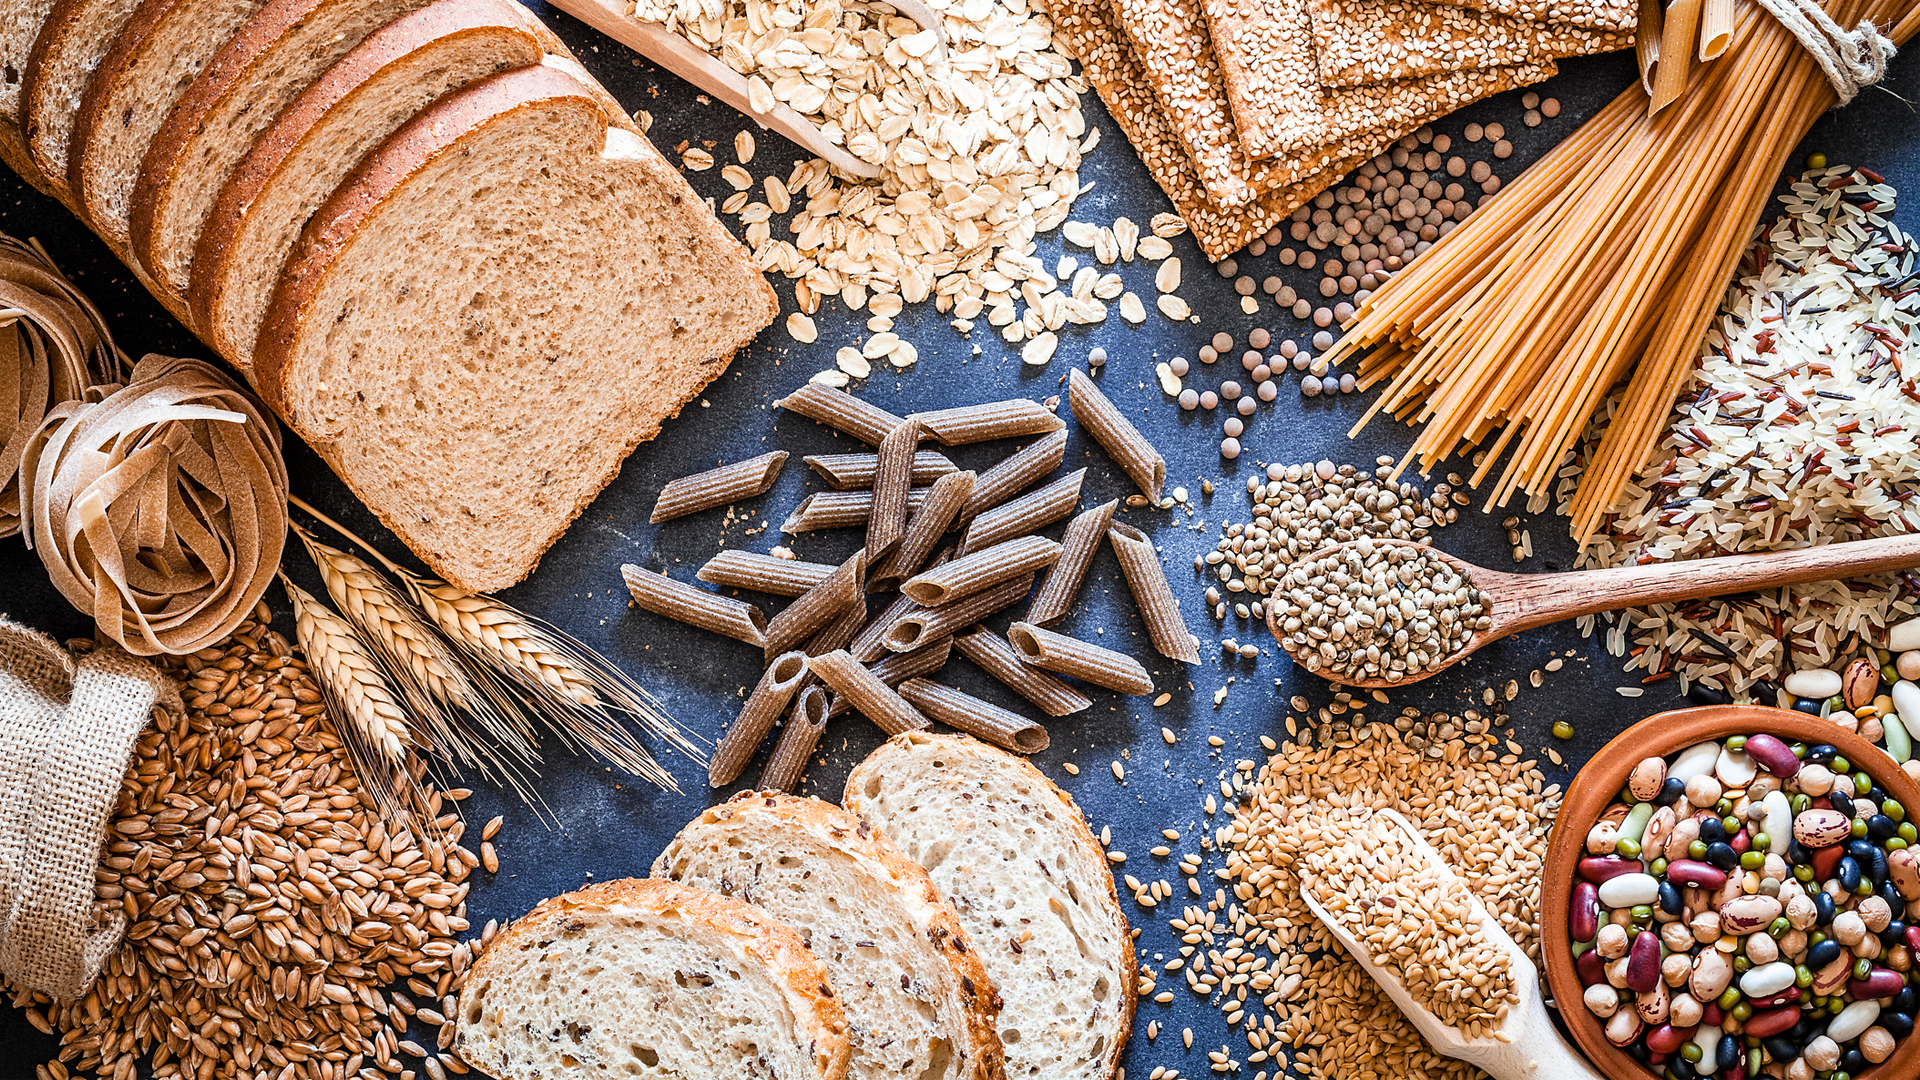 The picture shows a variety of carbohydrates, including pasta, bread, and grains